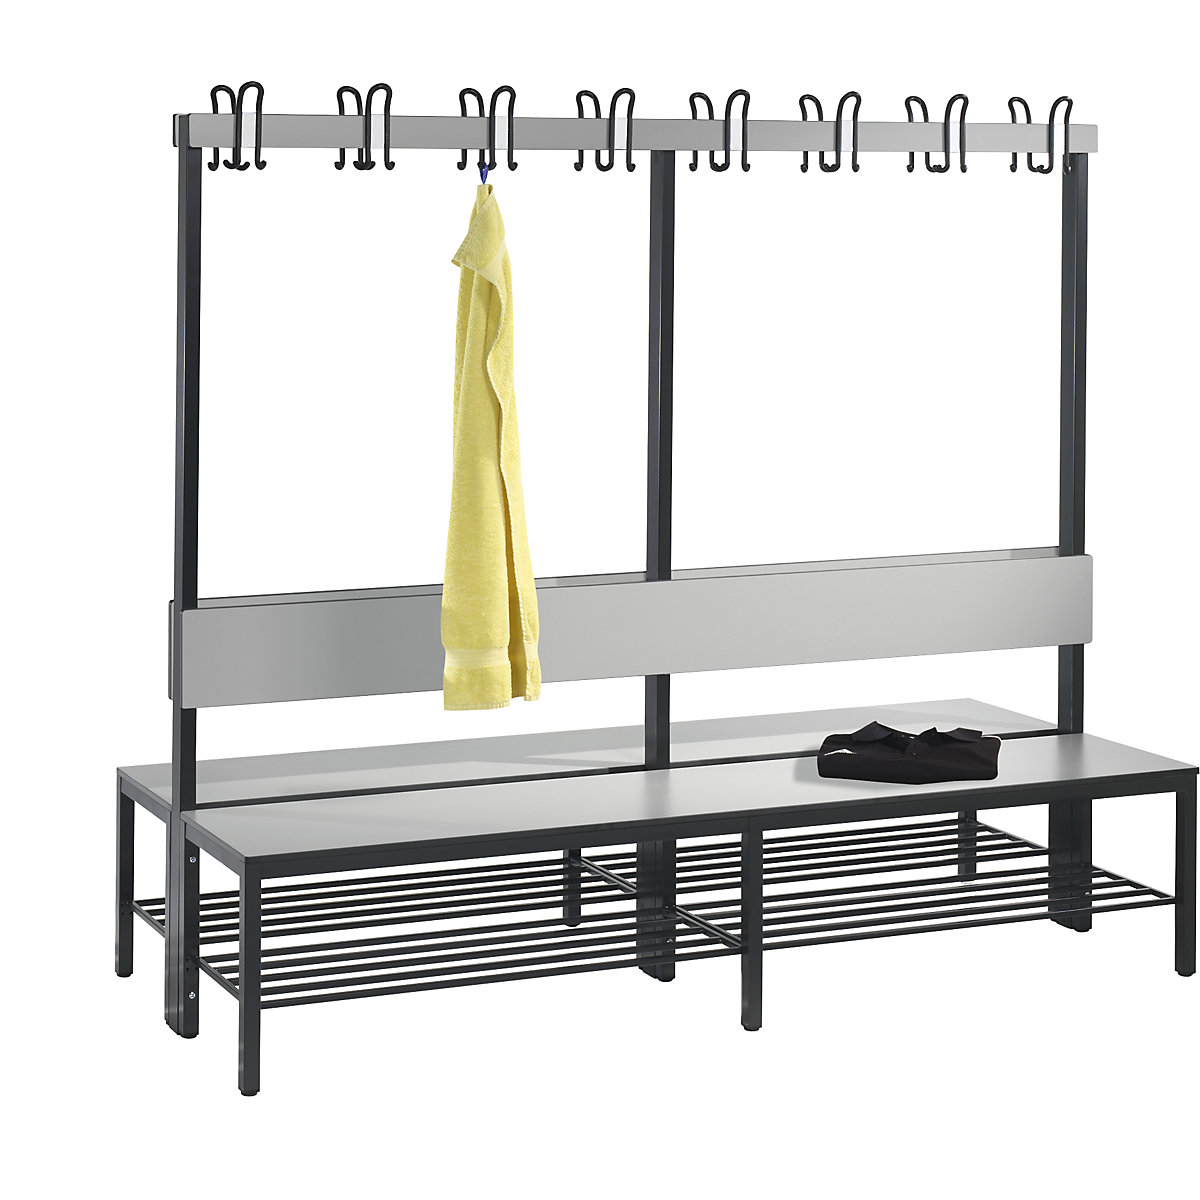 BASIC PLUS cloakroom bench, double sided – C+P, seat HPL, hook rail, shoe rack, length 1960 mm, silver grey-10